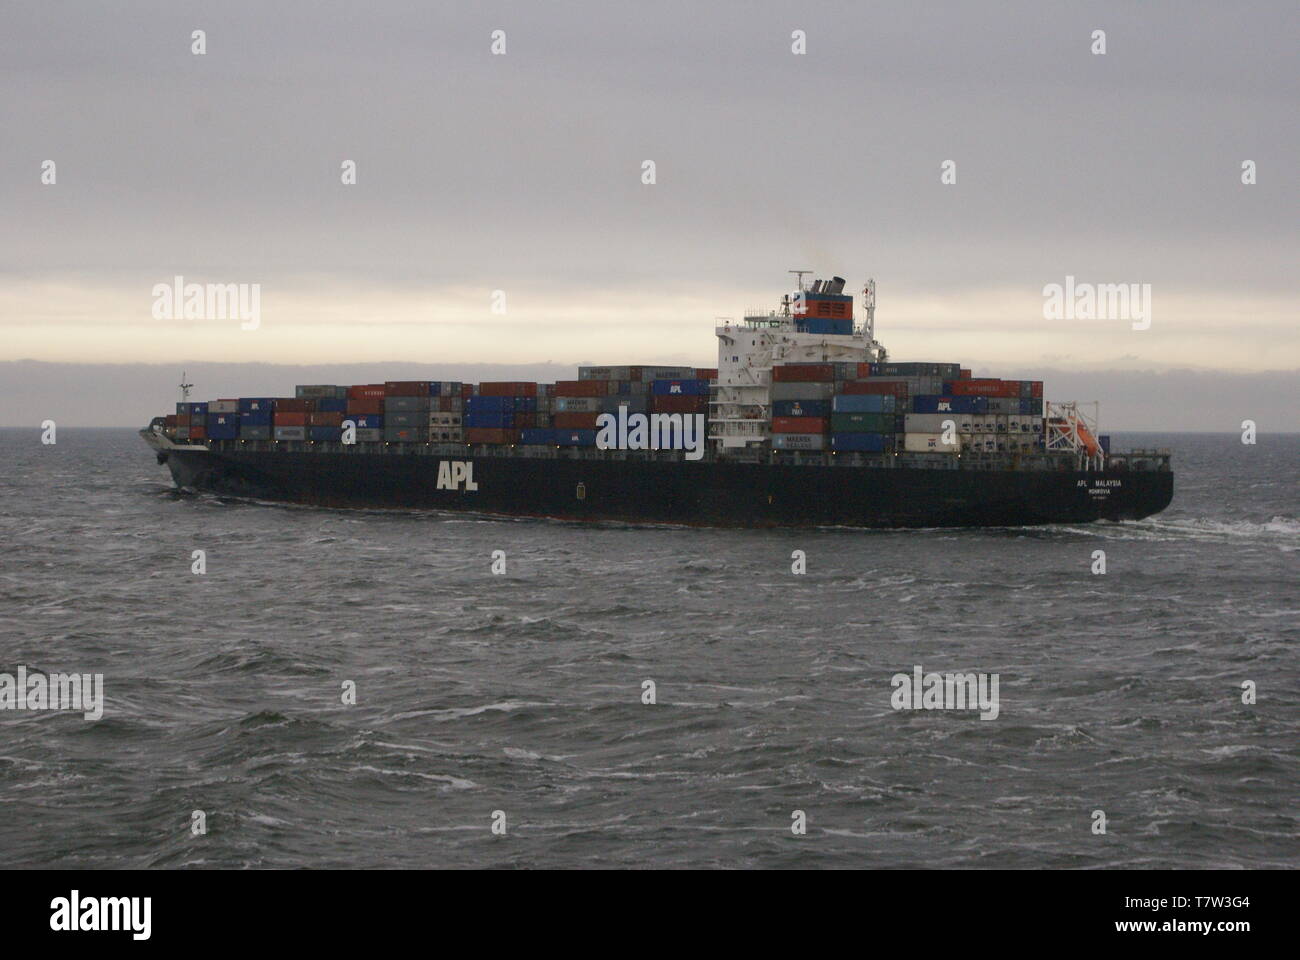 Container ship APL MALAYSIA IMO number : 9196917 . North sea. Stock Photo